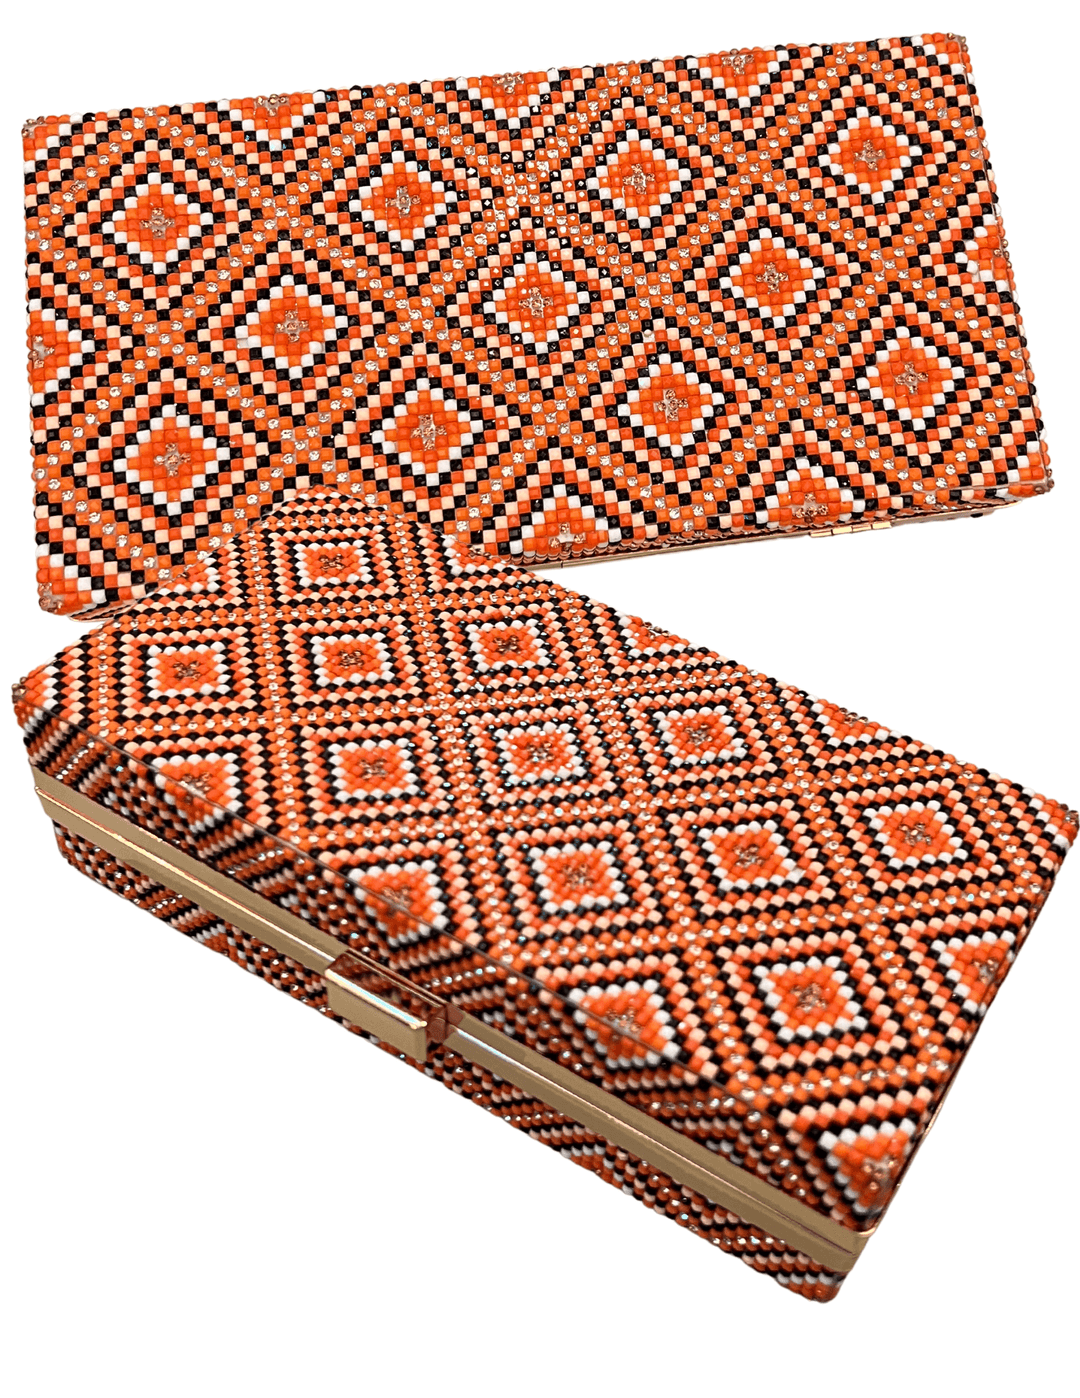 orange and white gems Vivid Colorful Printed clutch for cocktail events